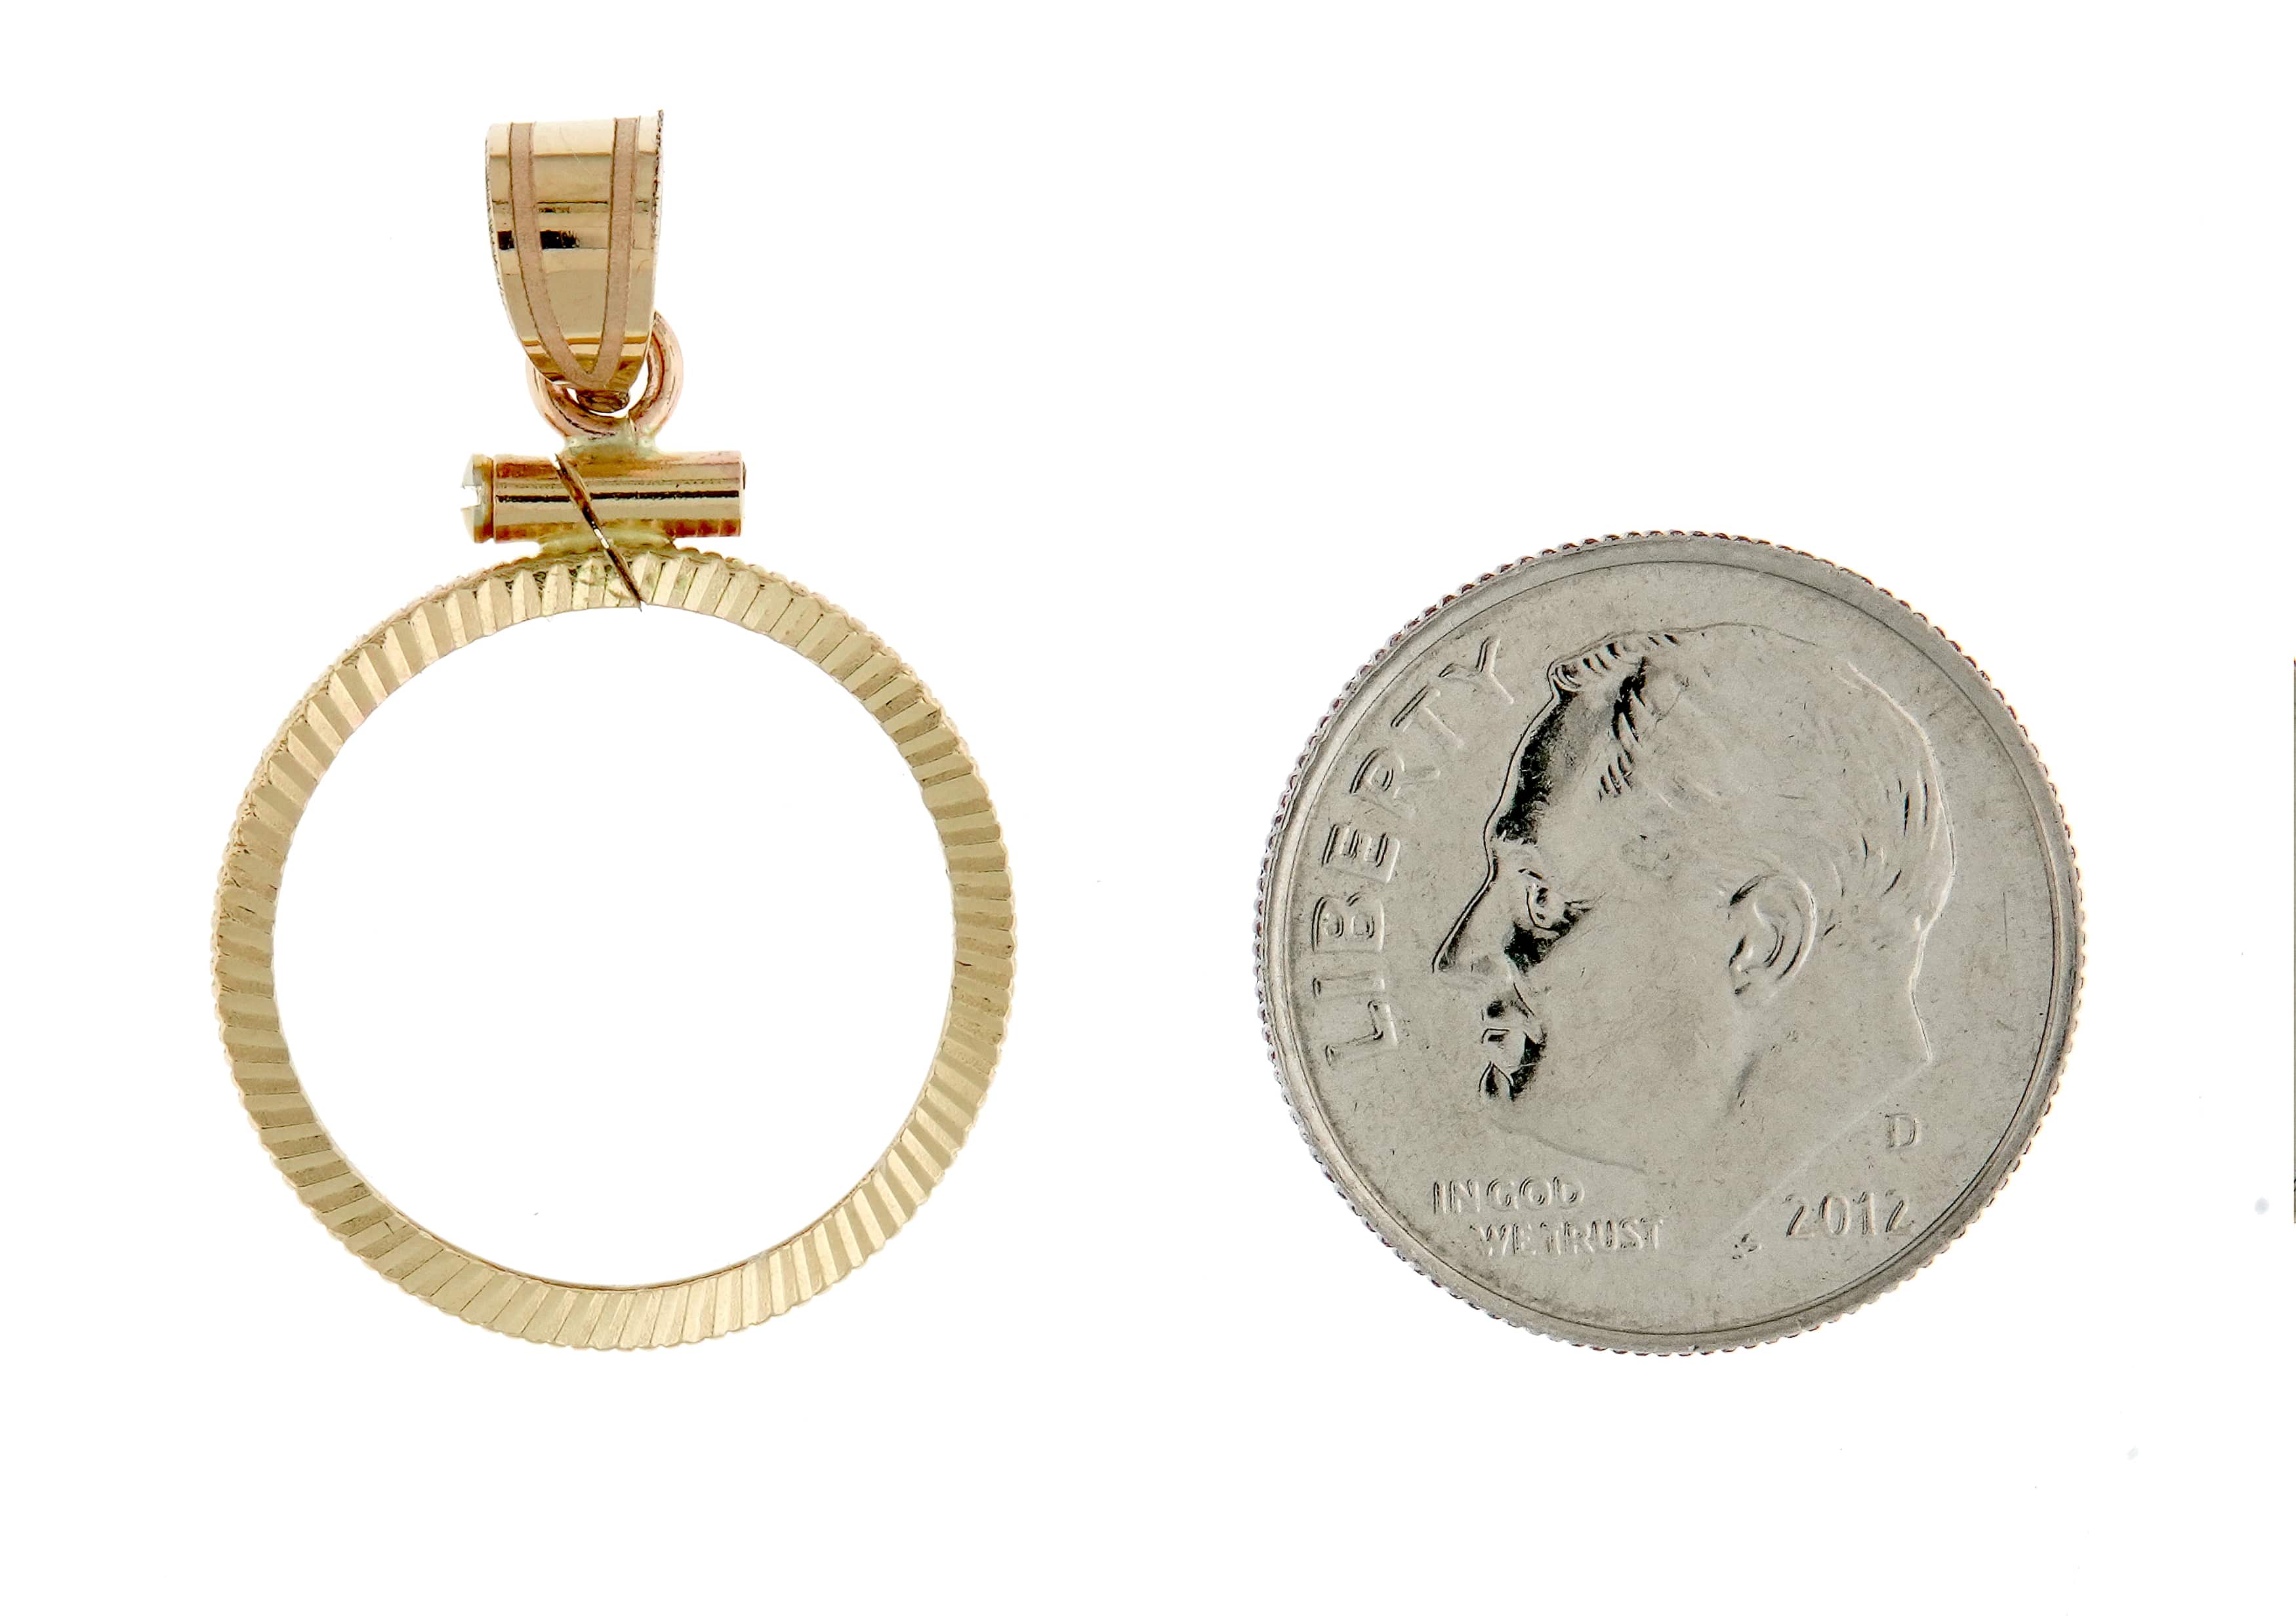 14K Yellow Gold 1/10 oz or One Tenth Ounce American Eagle Coin Holder Holds 16.5mm x 1.3mm Bezel Pendant Charm Screw Top